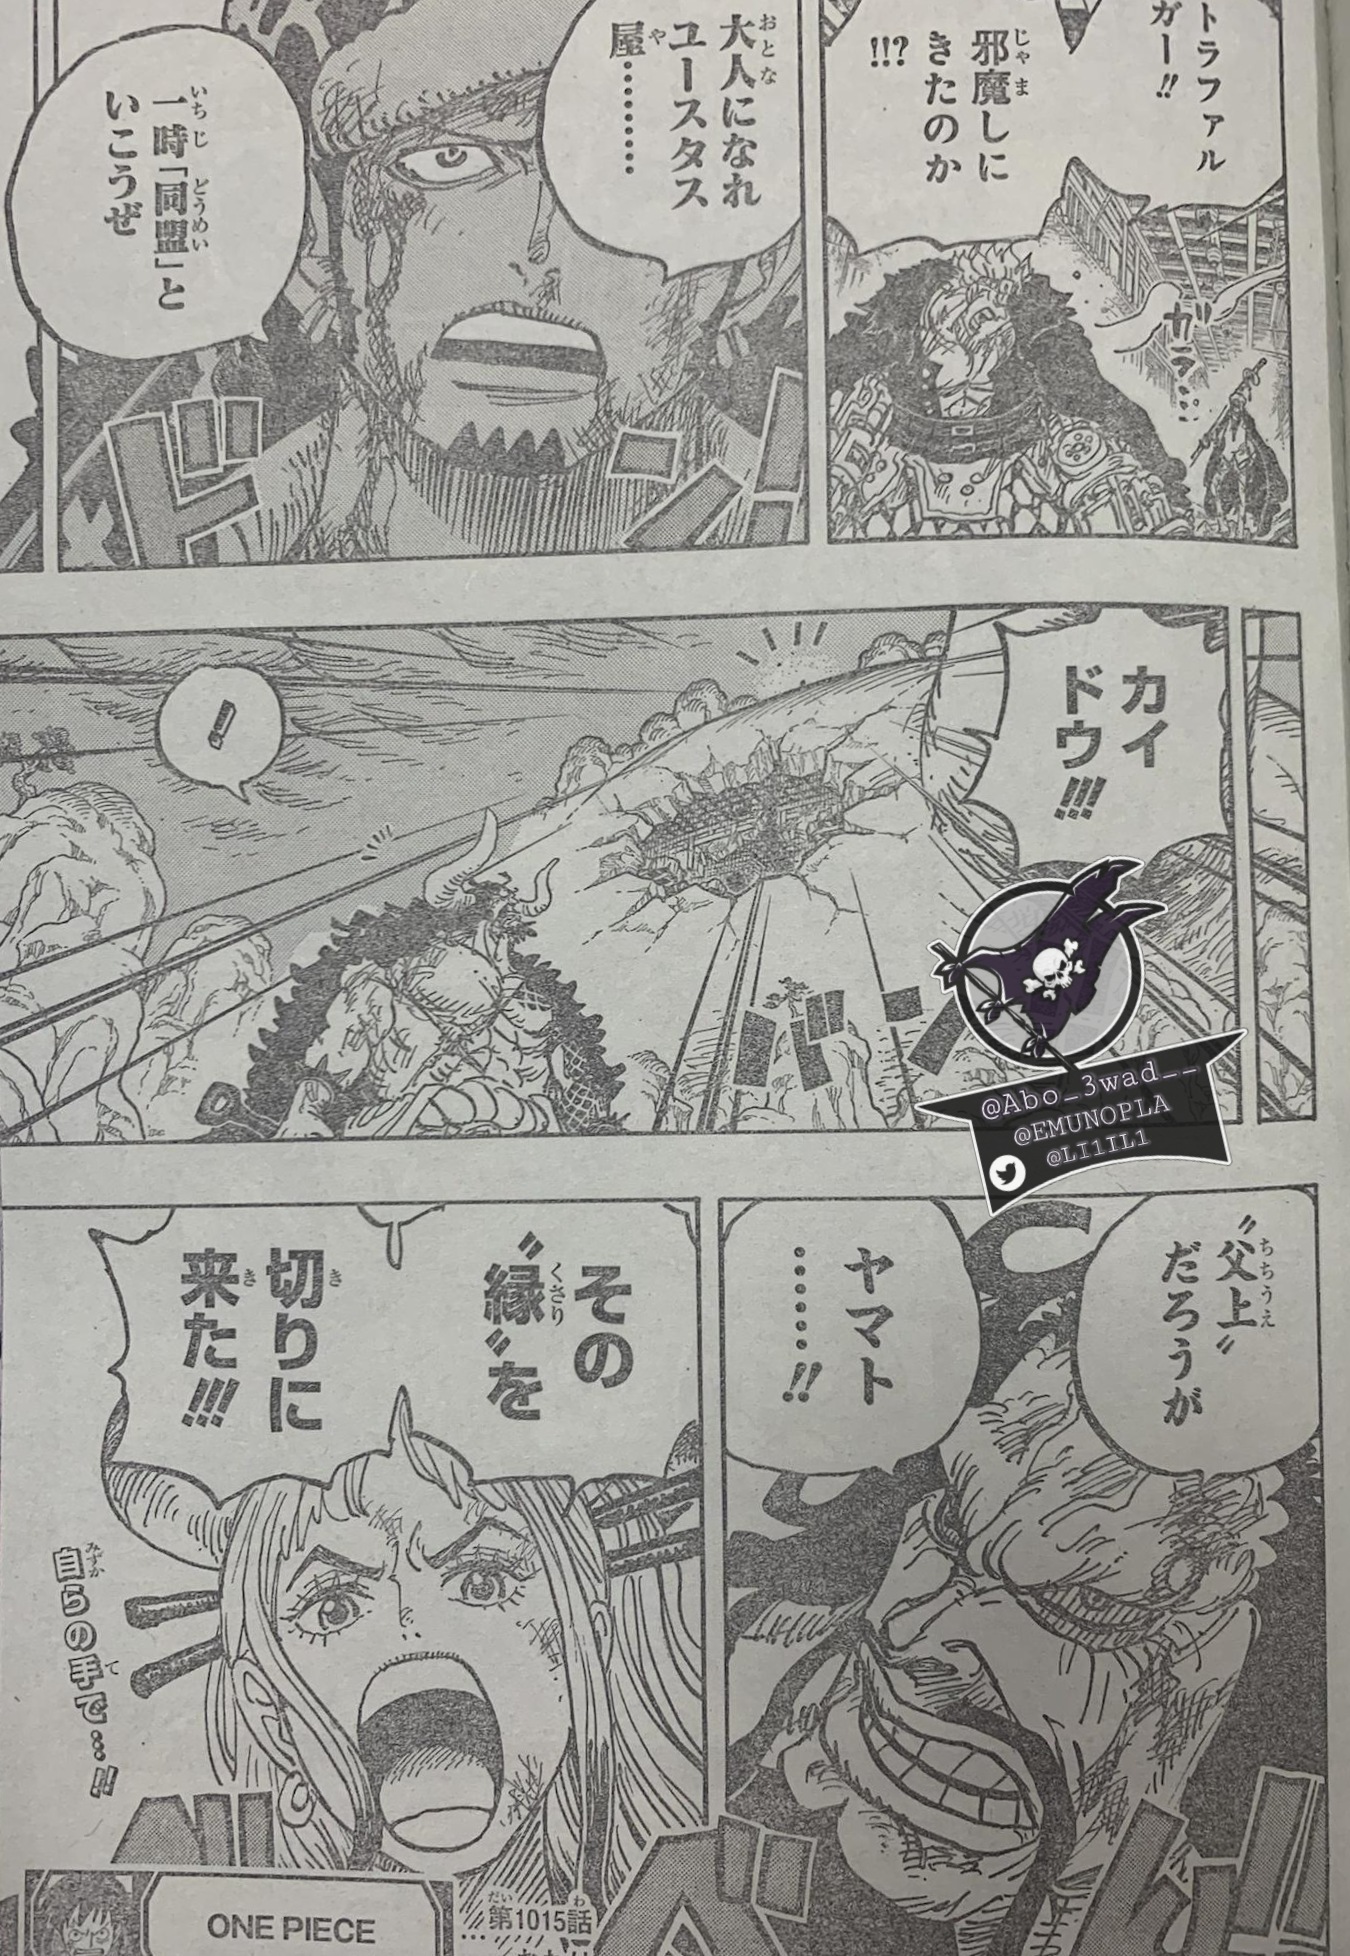 Spoiler One Piece Chapter 1015 Spoilers Discussion Page 504 Worstgen